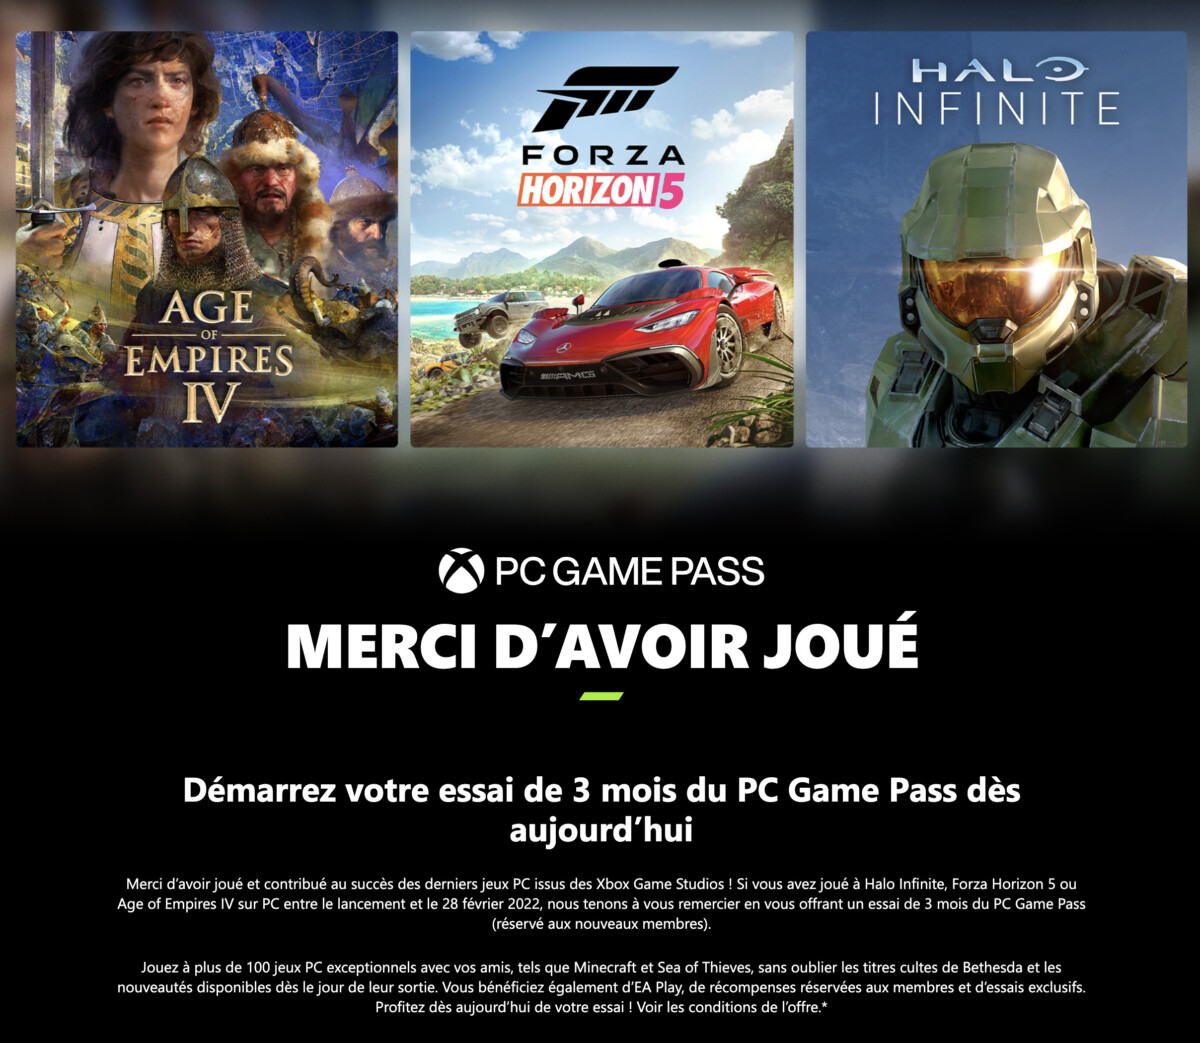 PC Game Pass: 3 months free if you liked Halo Infinite or Forza Horizon 5